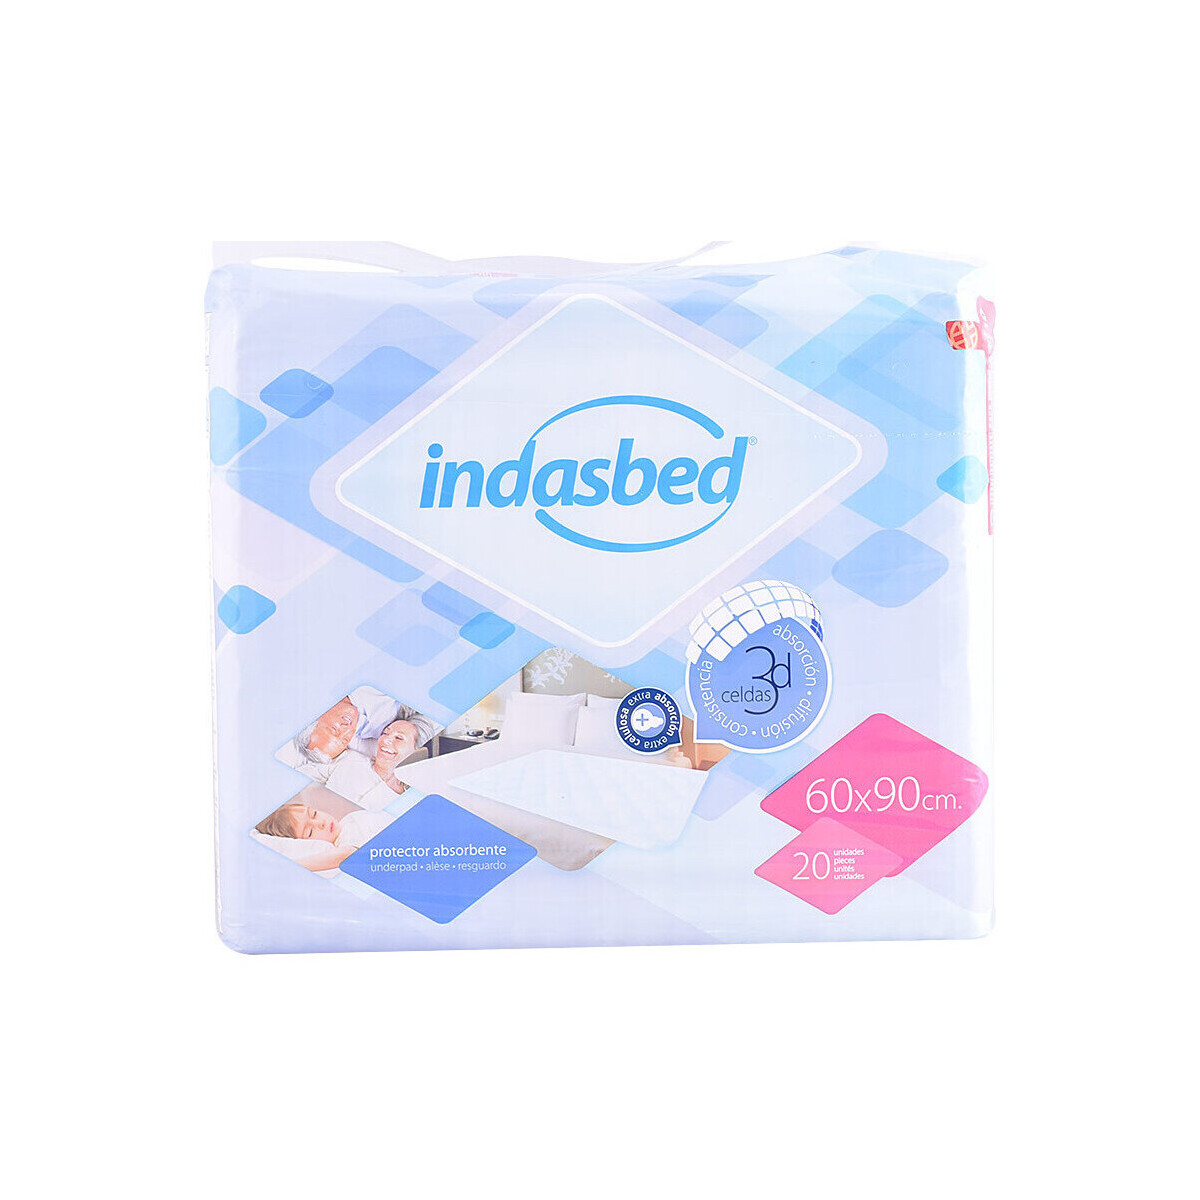 Beauté Accessoires corps Indasec Indasbed Protector Absorbente 60x90 Cm 